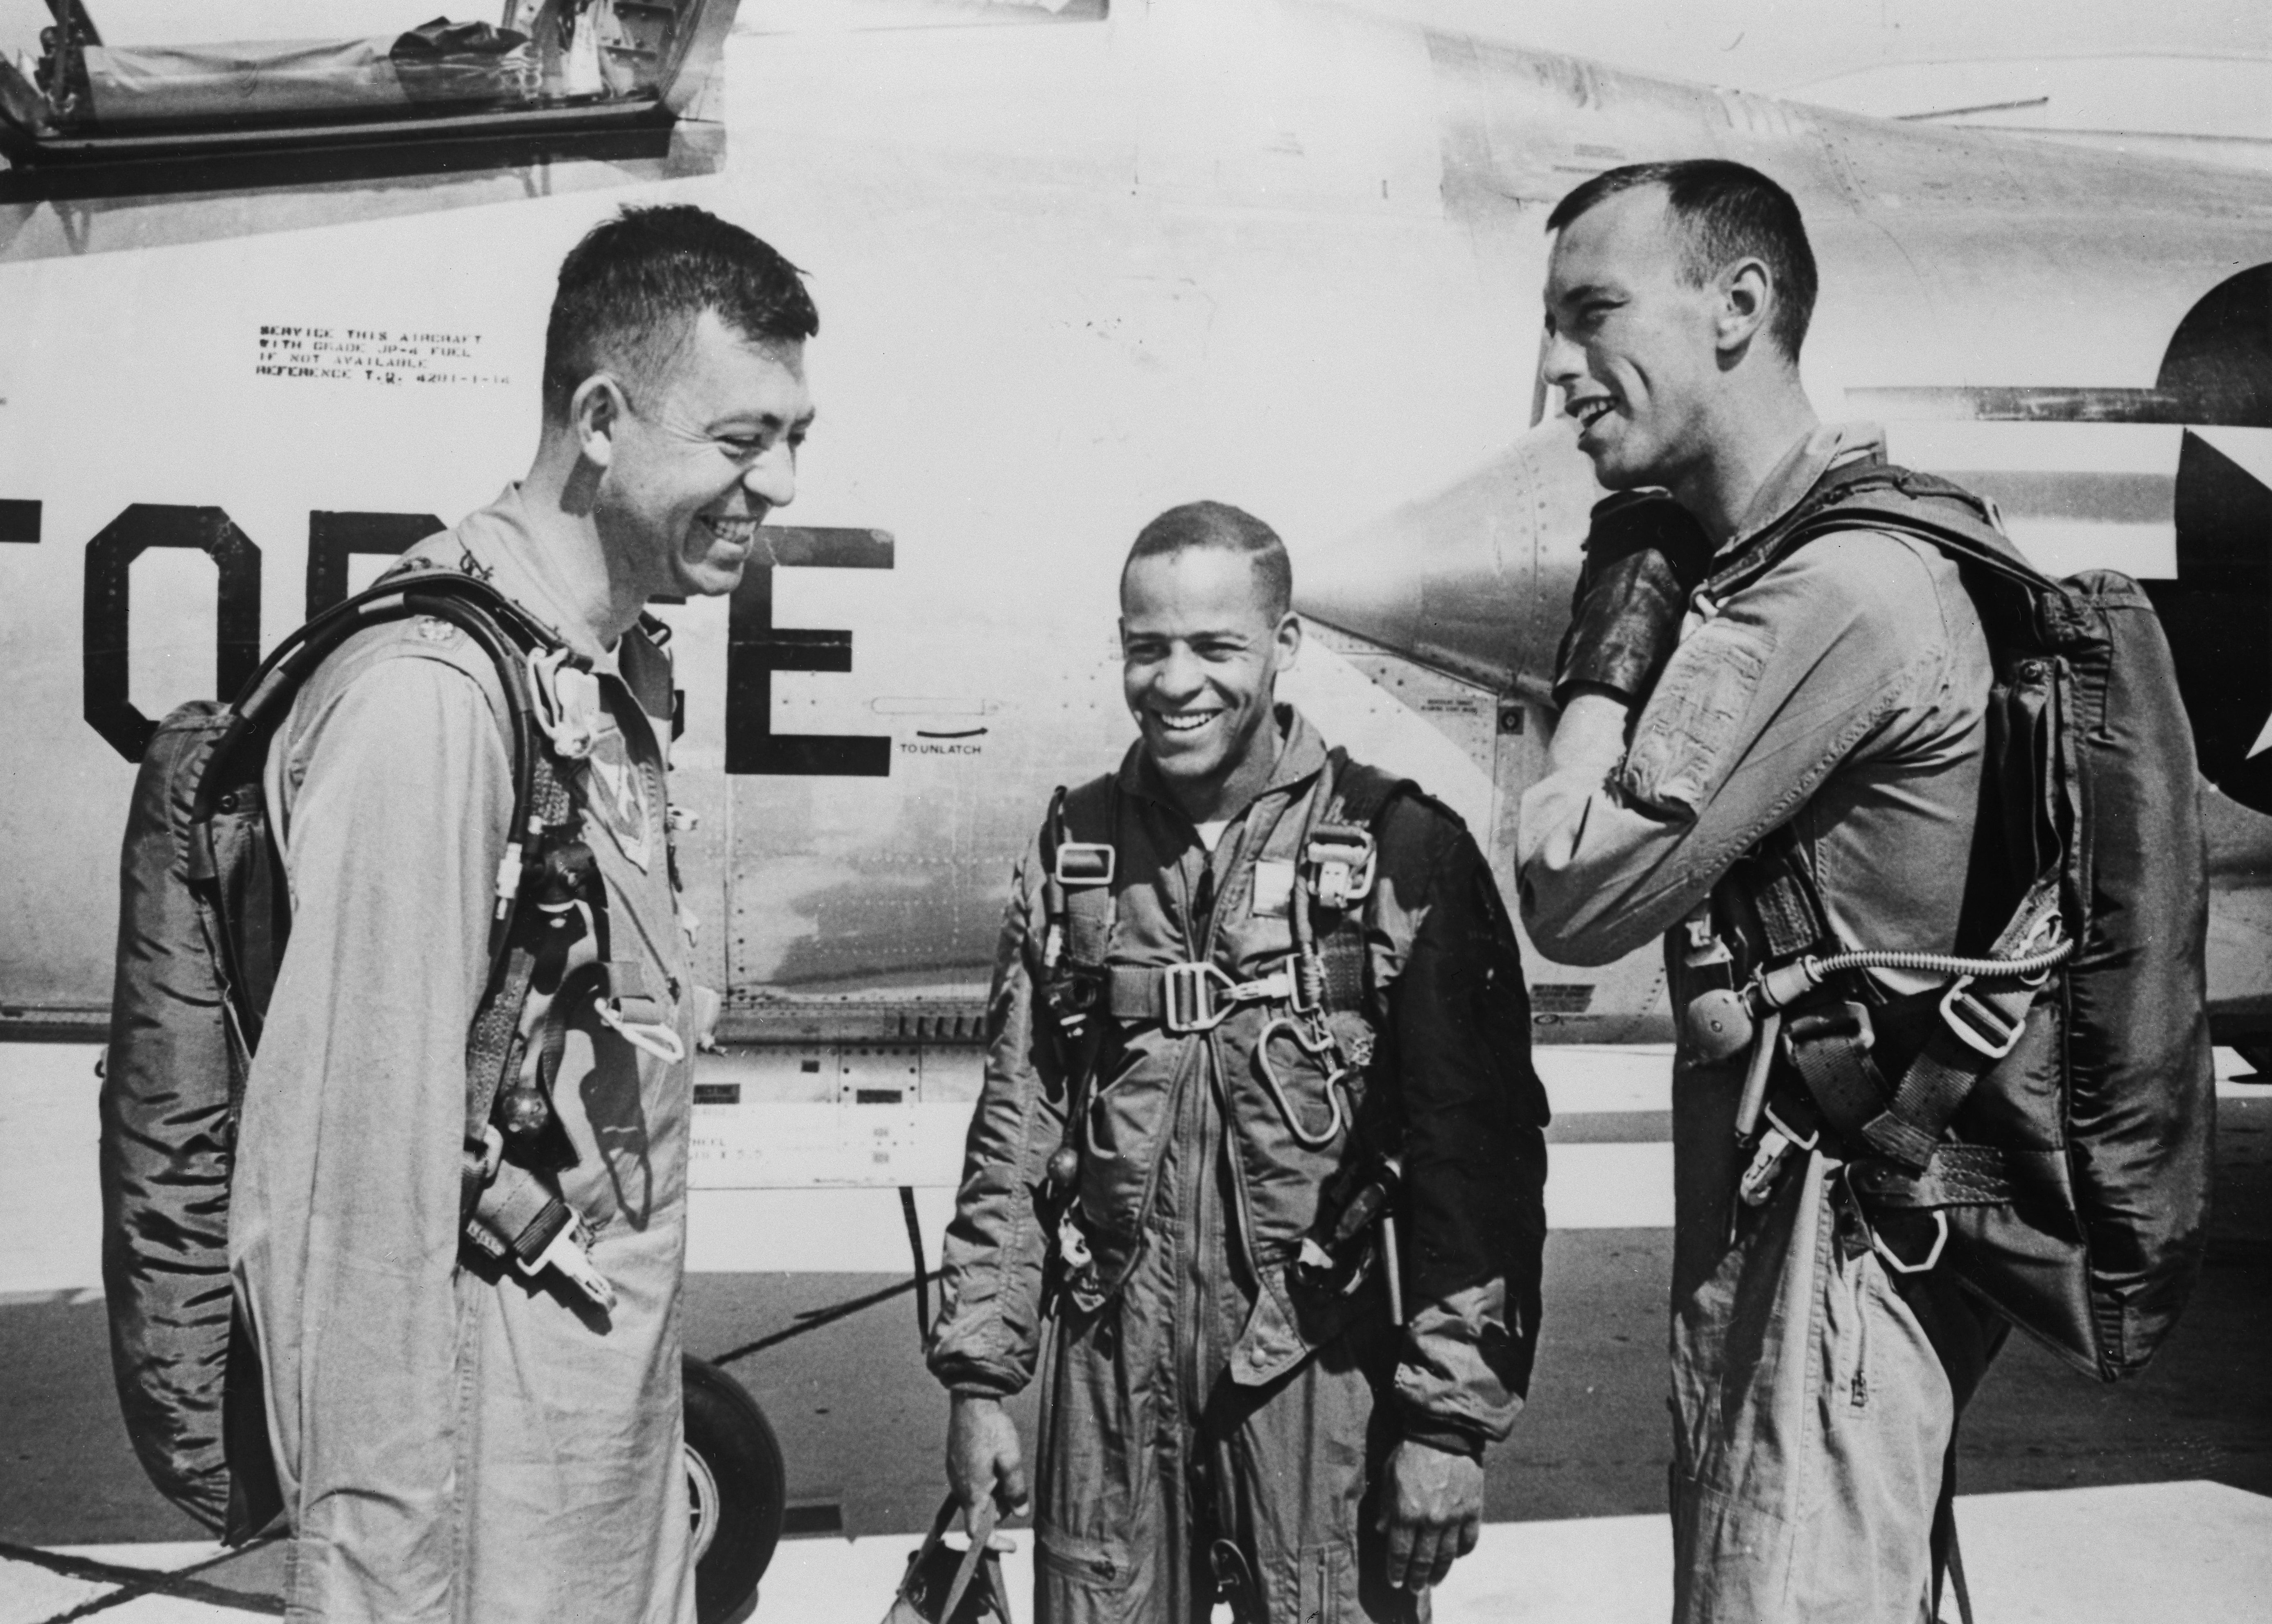 Ed Dwight (centre) pictured with fellow trainees in 1963 at the Aerospace Research Pilot School. Mr Dwight retired from the Air Force in 1966